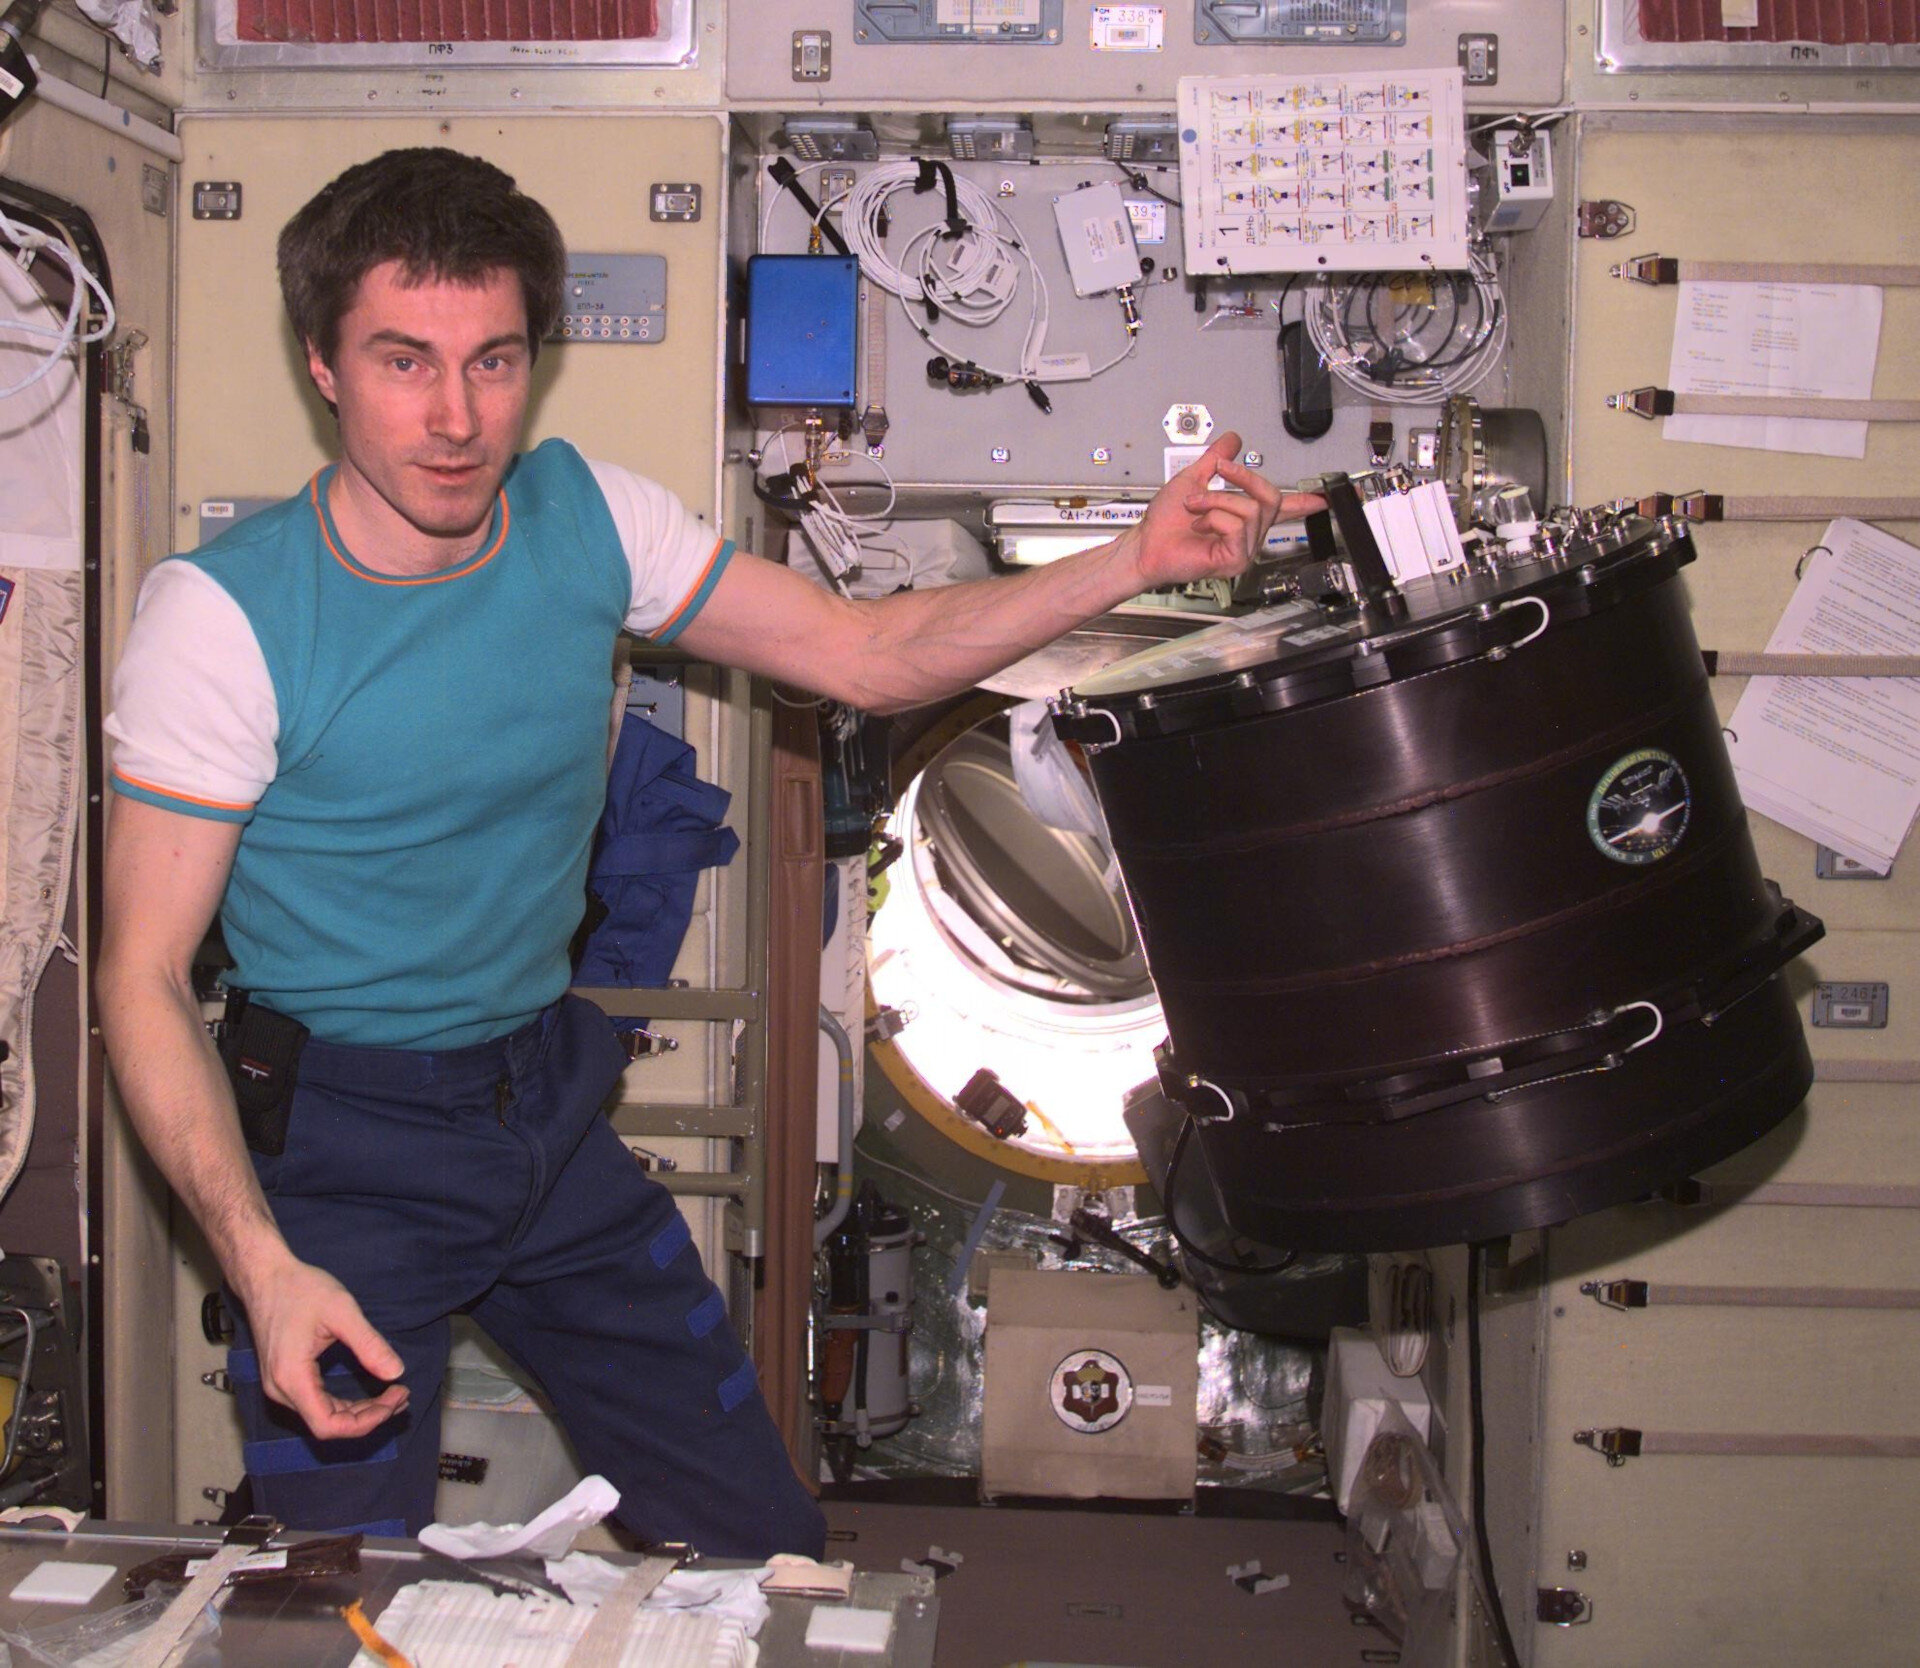 Sergei Krikalev with the PKE-Nefedov experiment during Expedition 1 mission